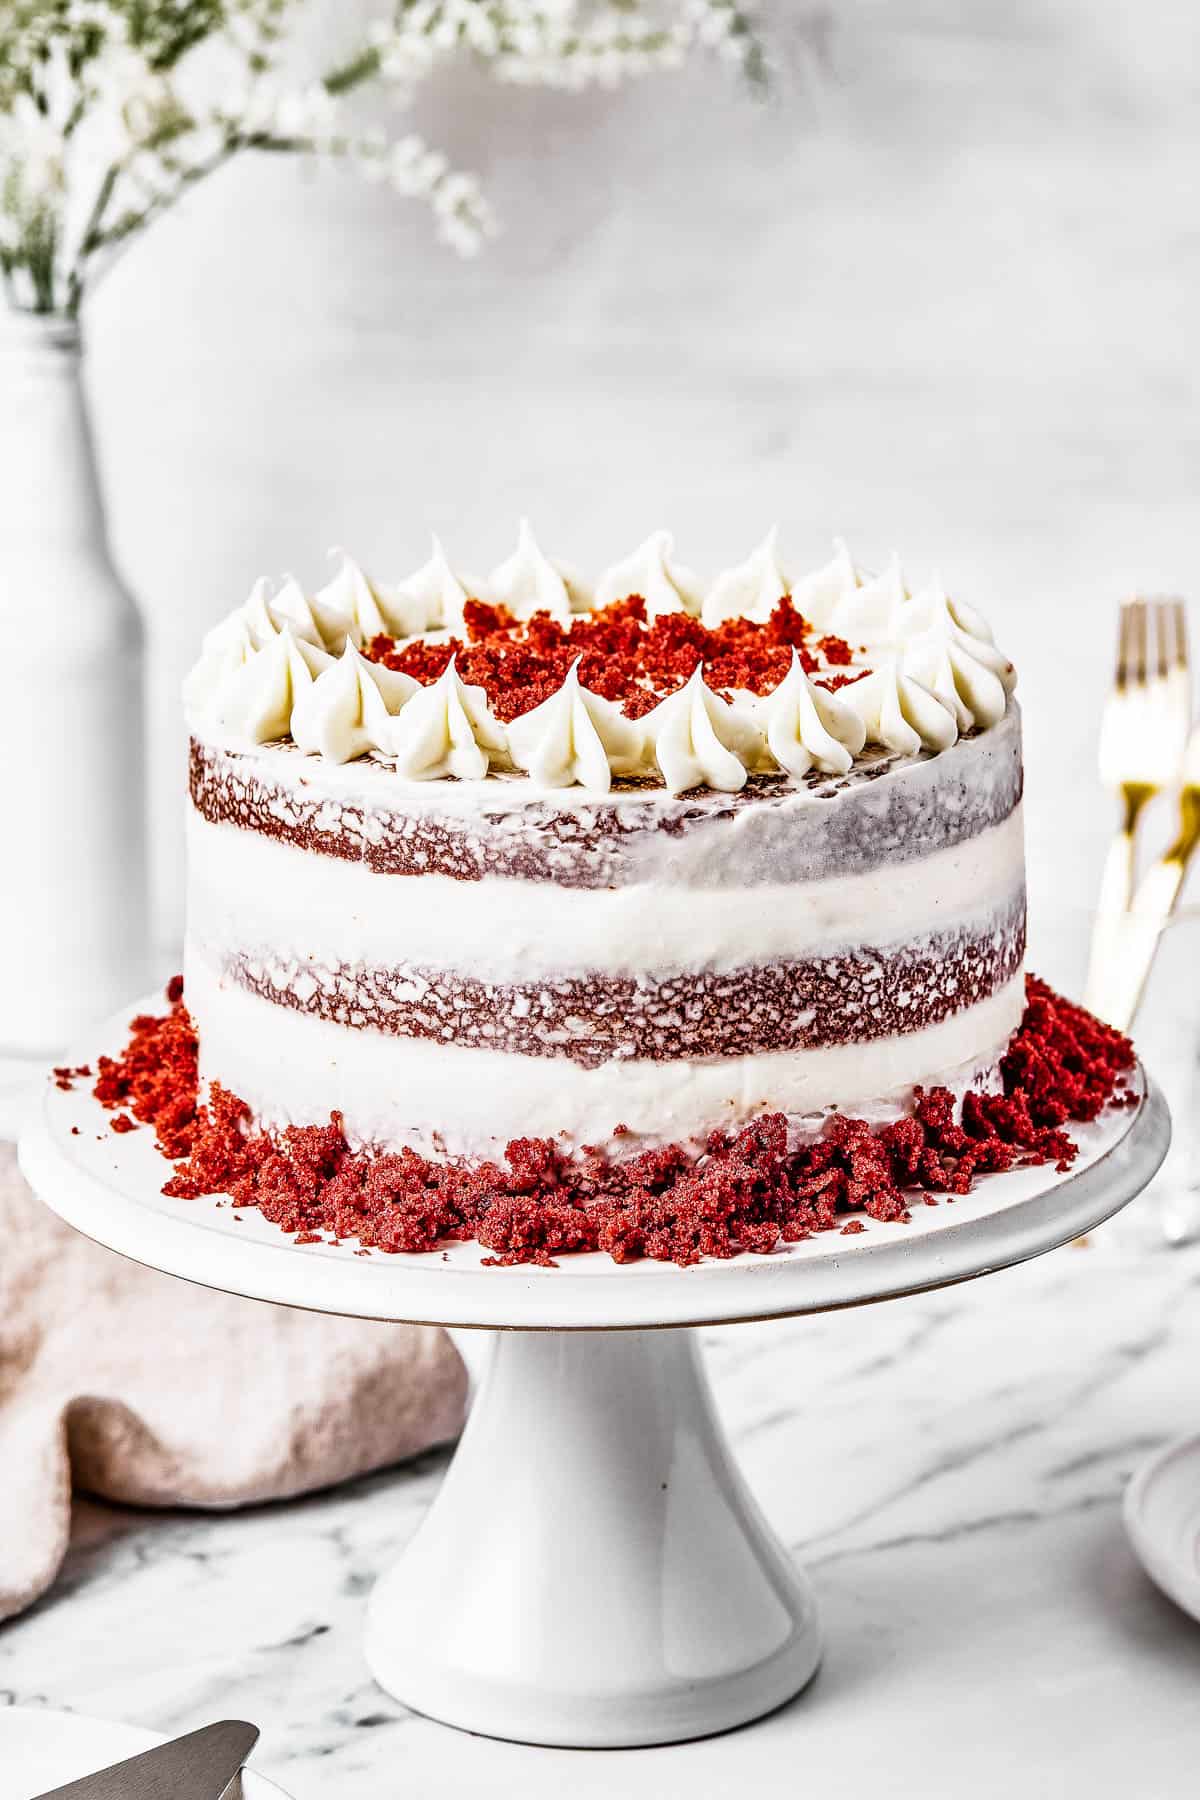 A red velvet cake on a cake stand.